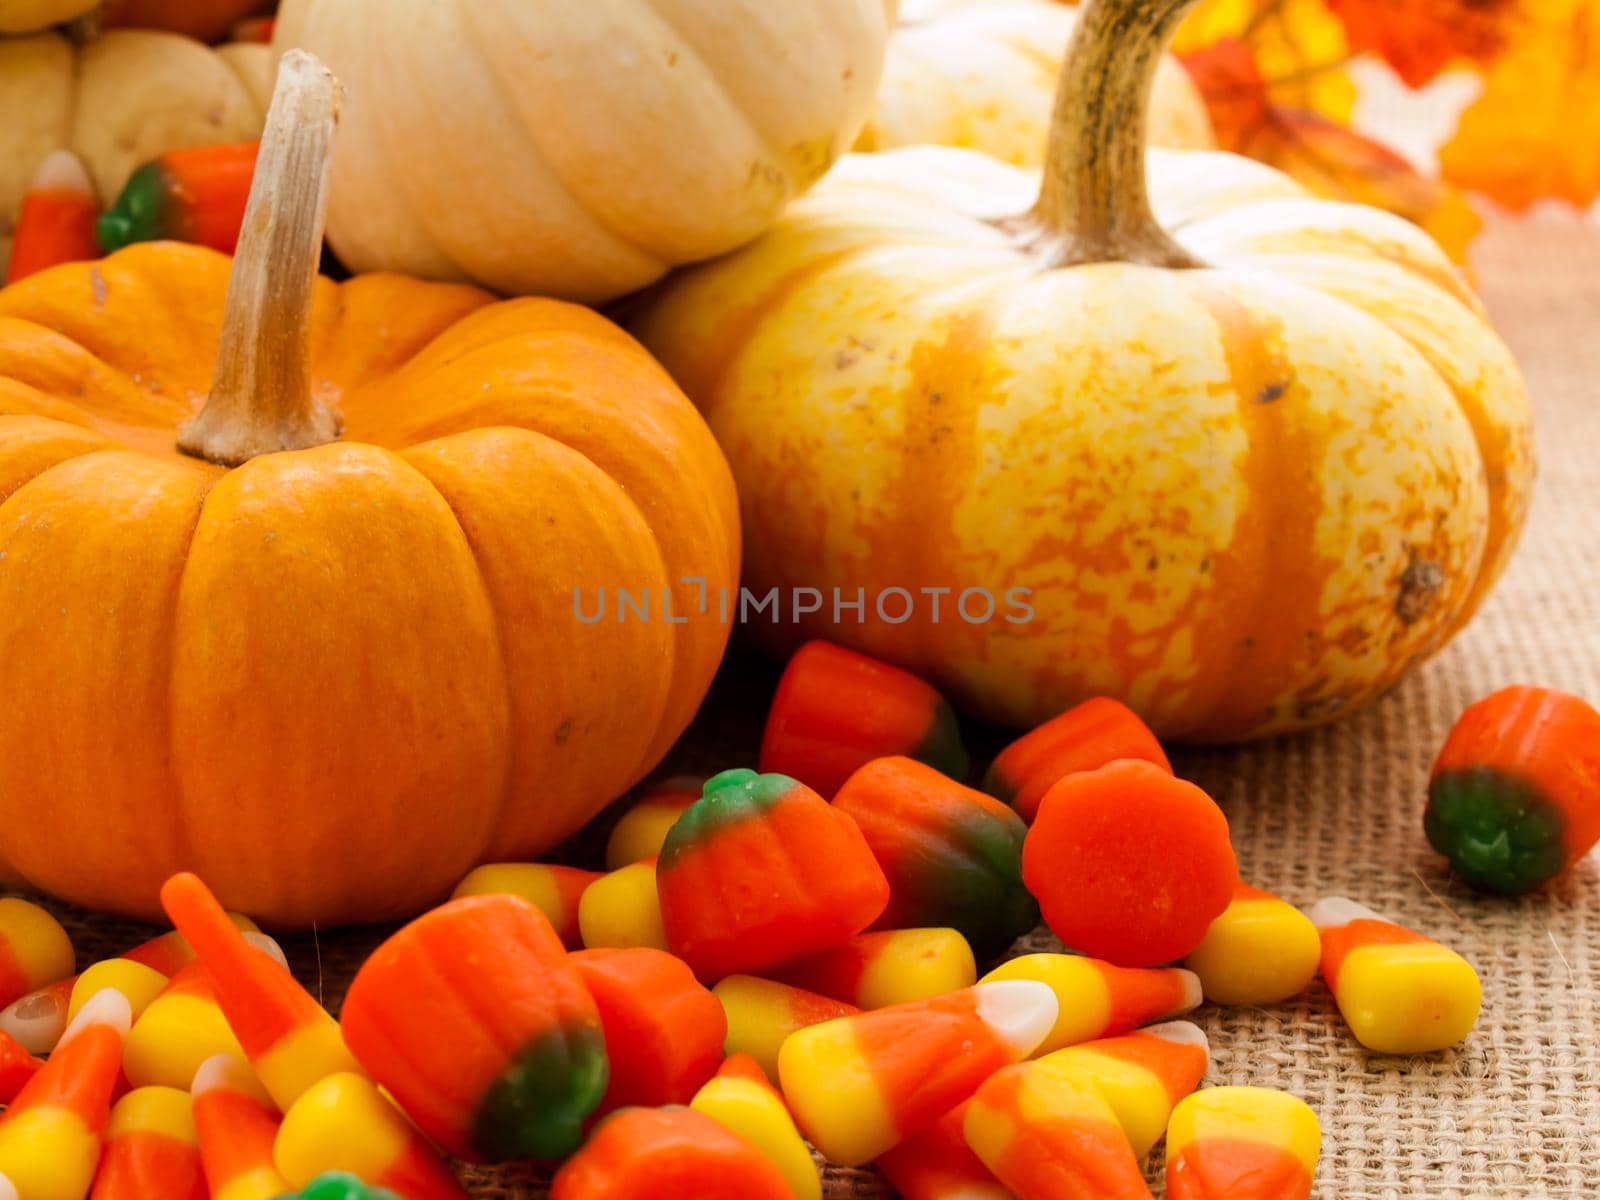 Small multi-color pumpkins and Halloween candies spilled from cornucopia.